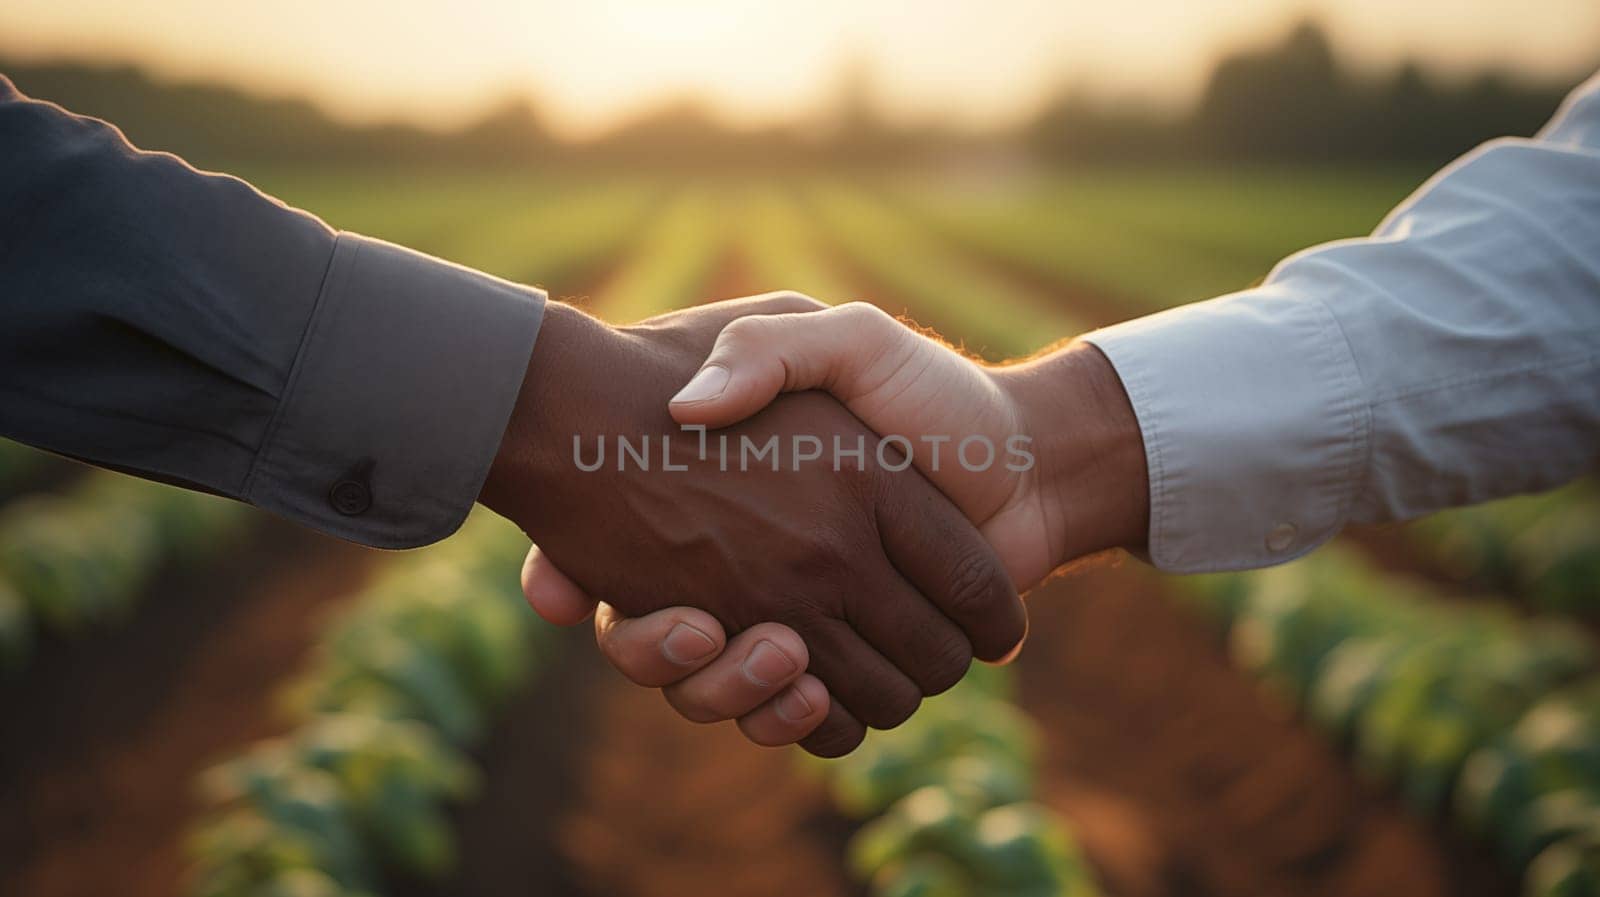 Handshake of two men in shirts, on the background of a farmer's field with green beds by Zakharova